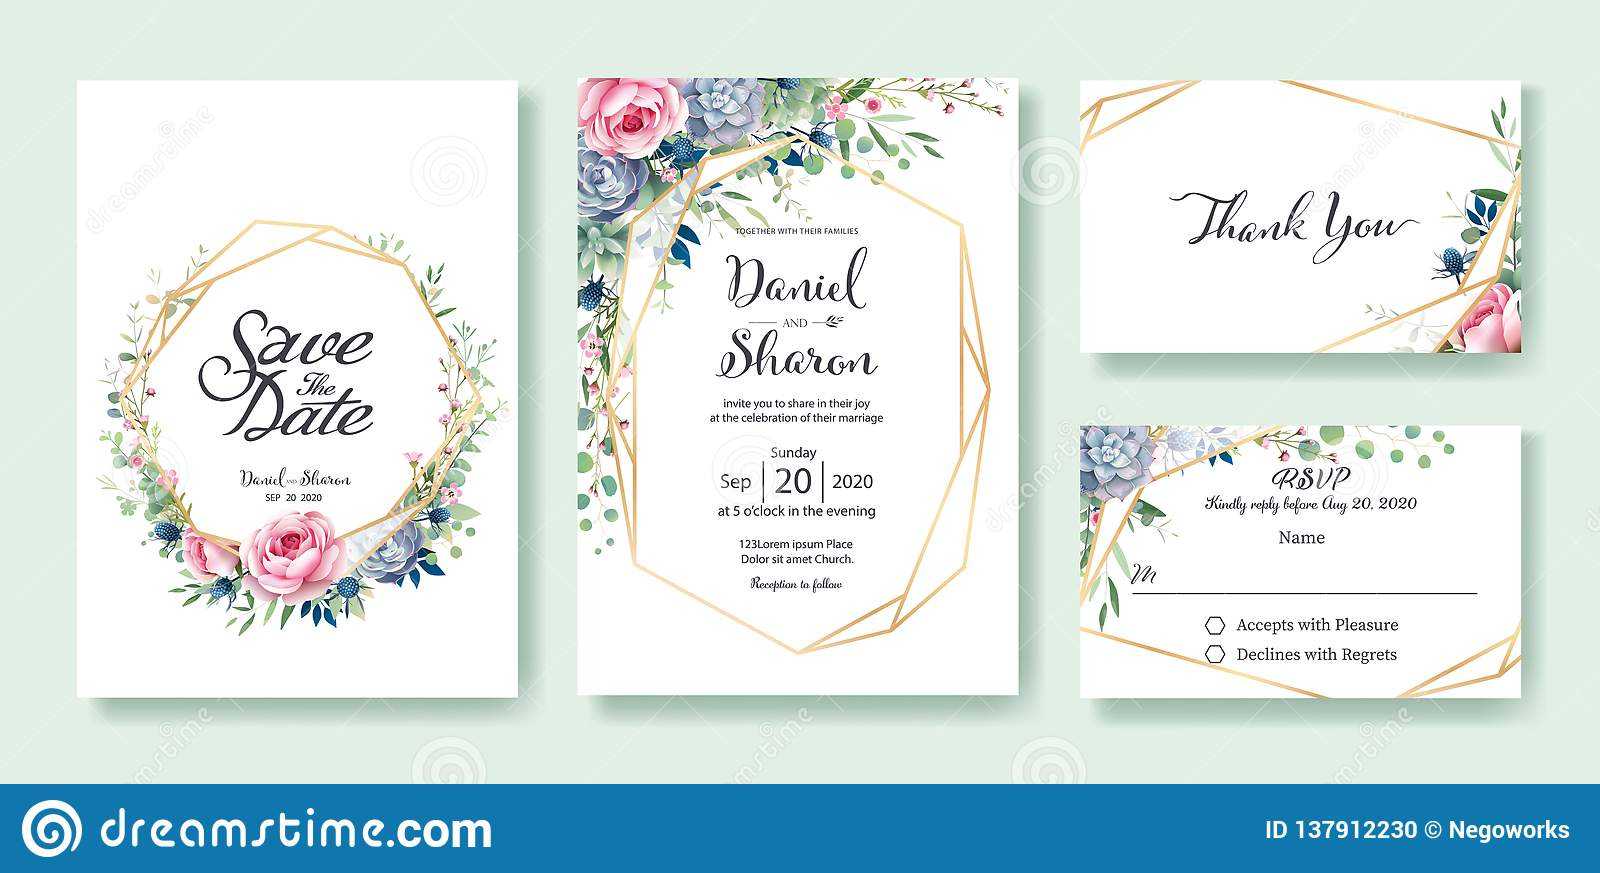 Wedding Invitation, Save The Date, Thank You, Rsvp Card Within Template For Rsvp Cards For Wedding